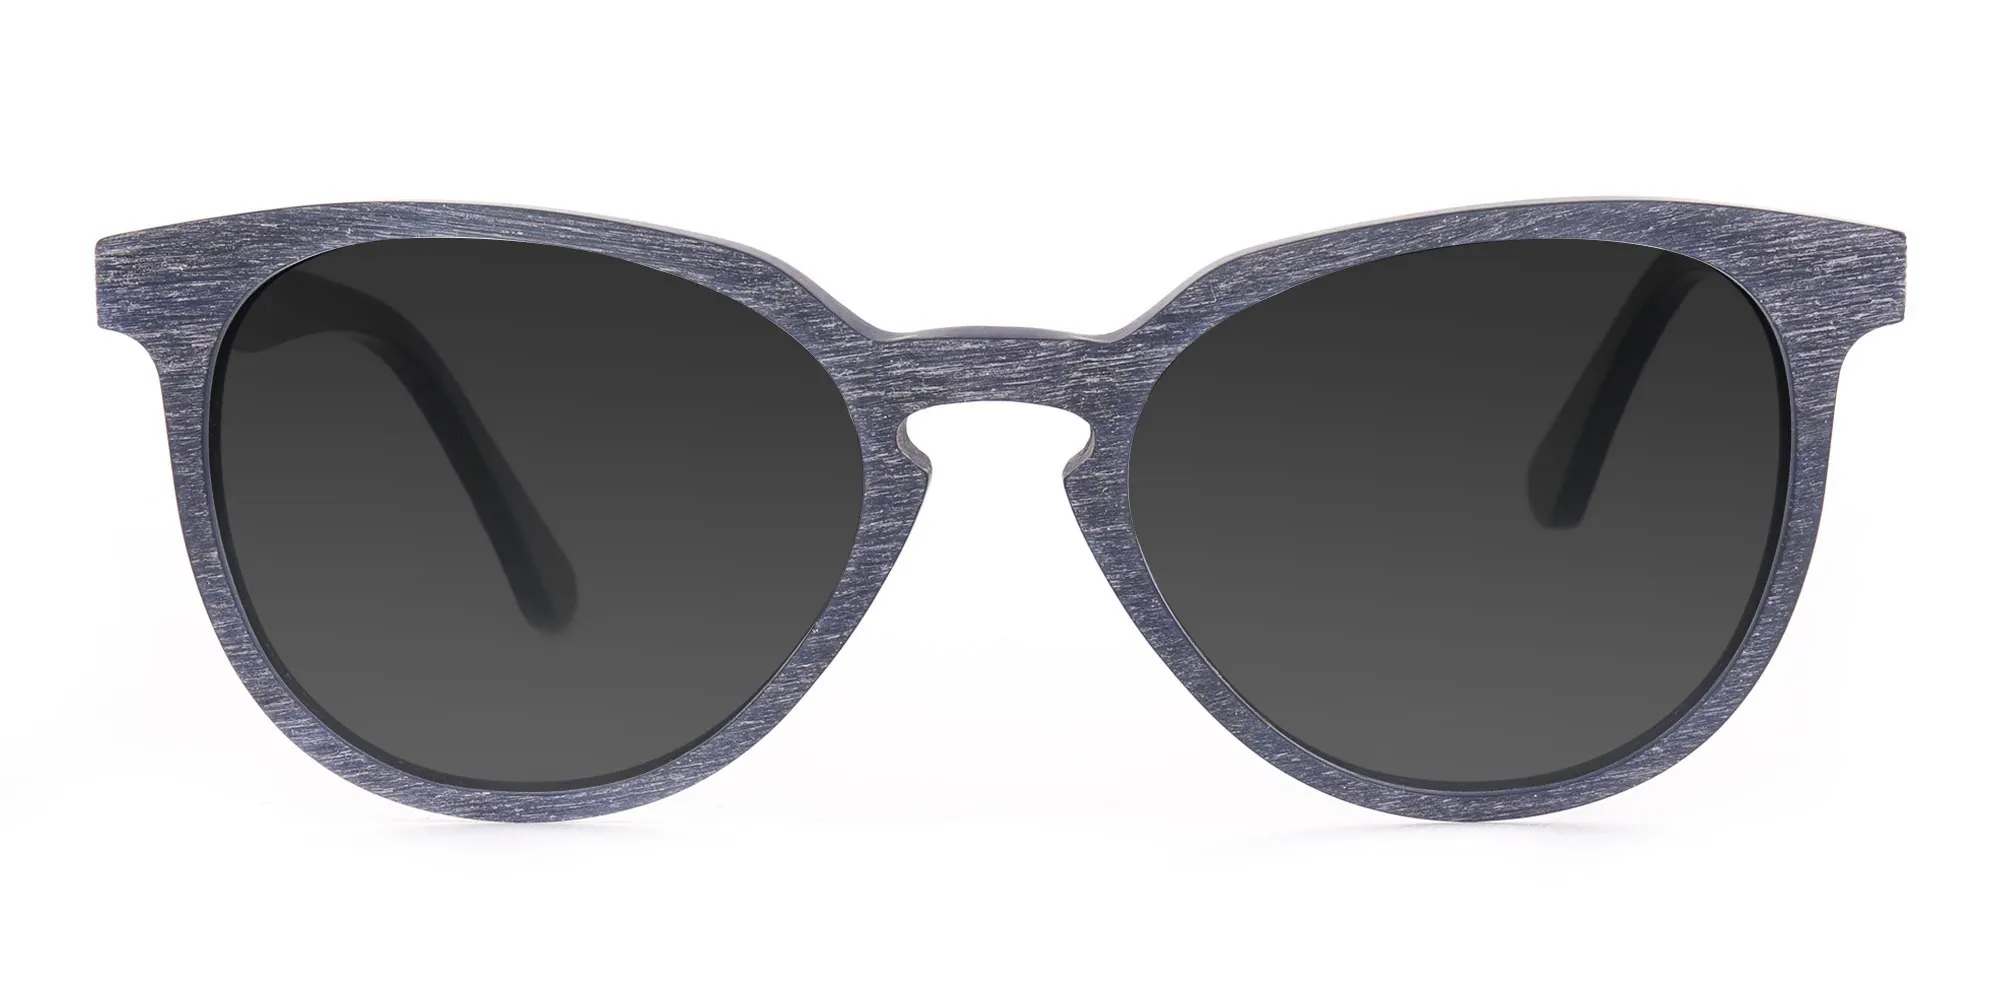 Dusty Green Wooden Sunglasses with Dark Grey Tint - 2